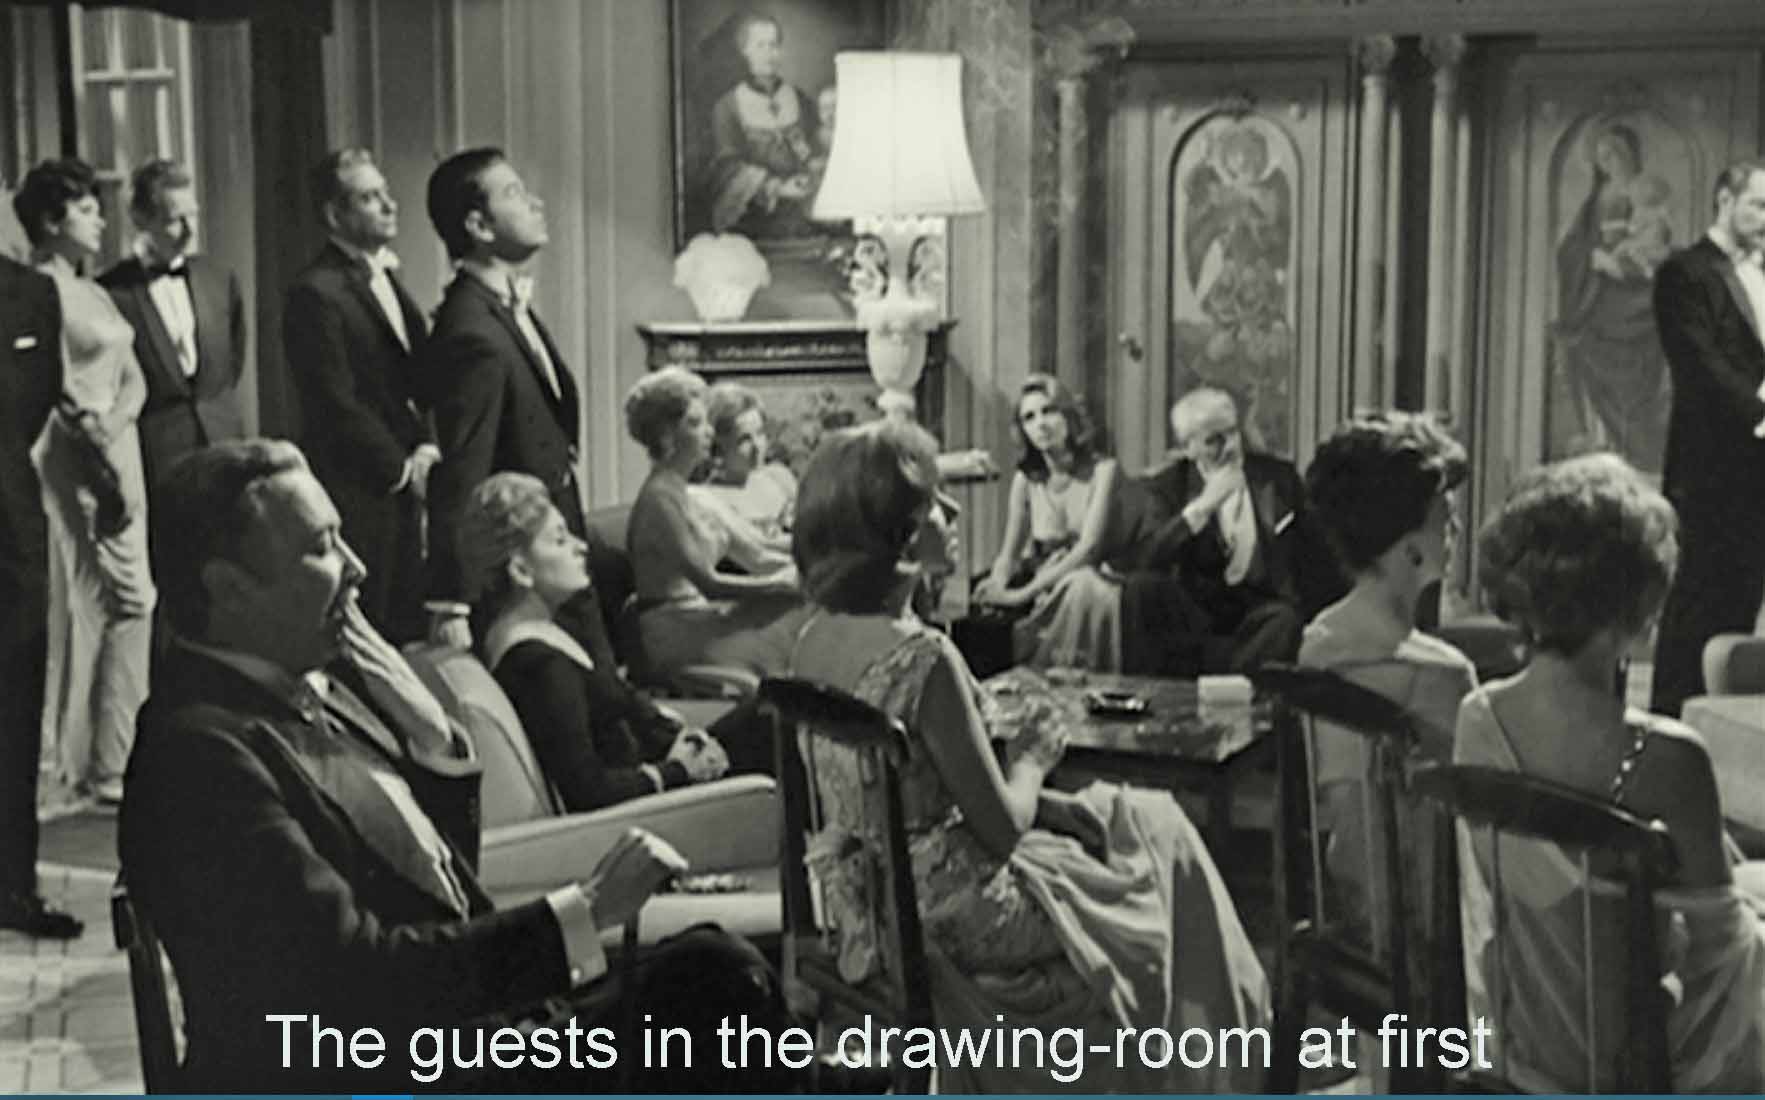 The guests in the drawing-room at first